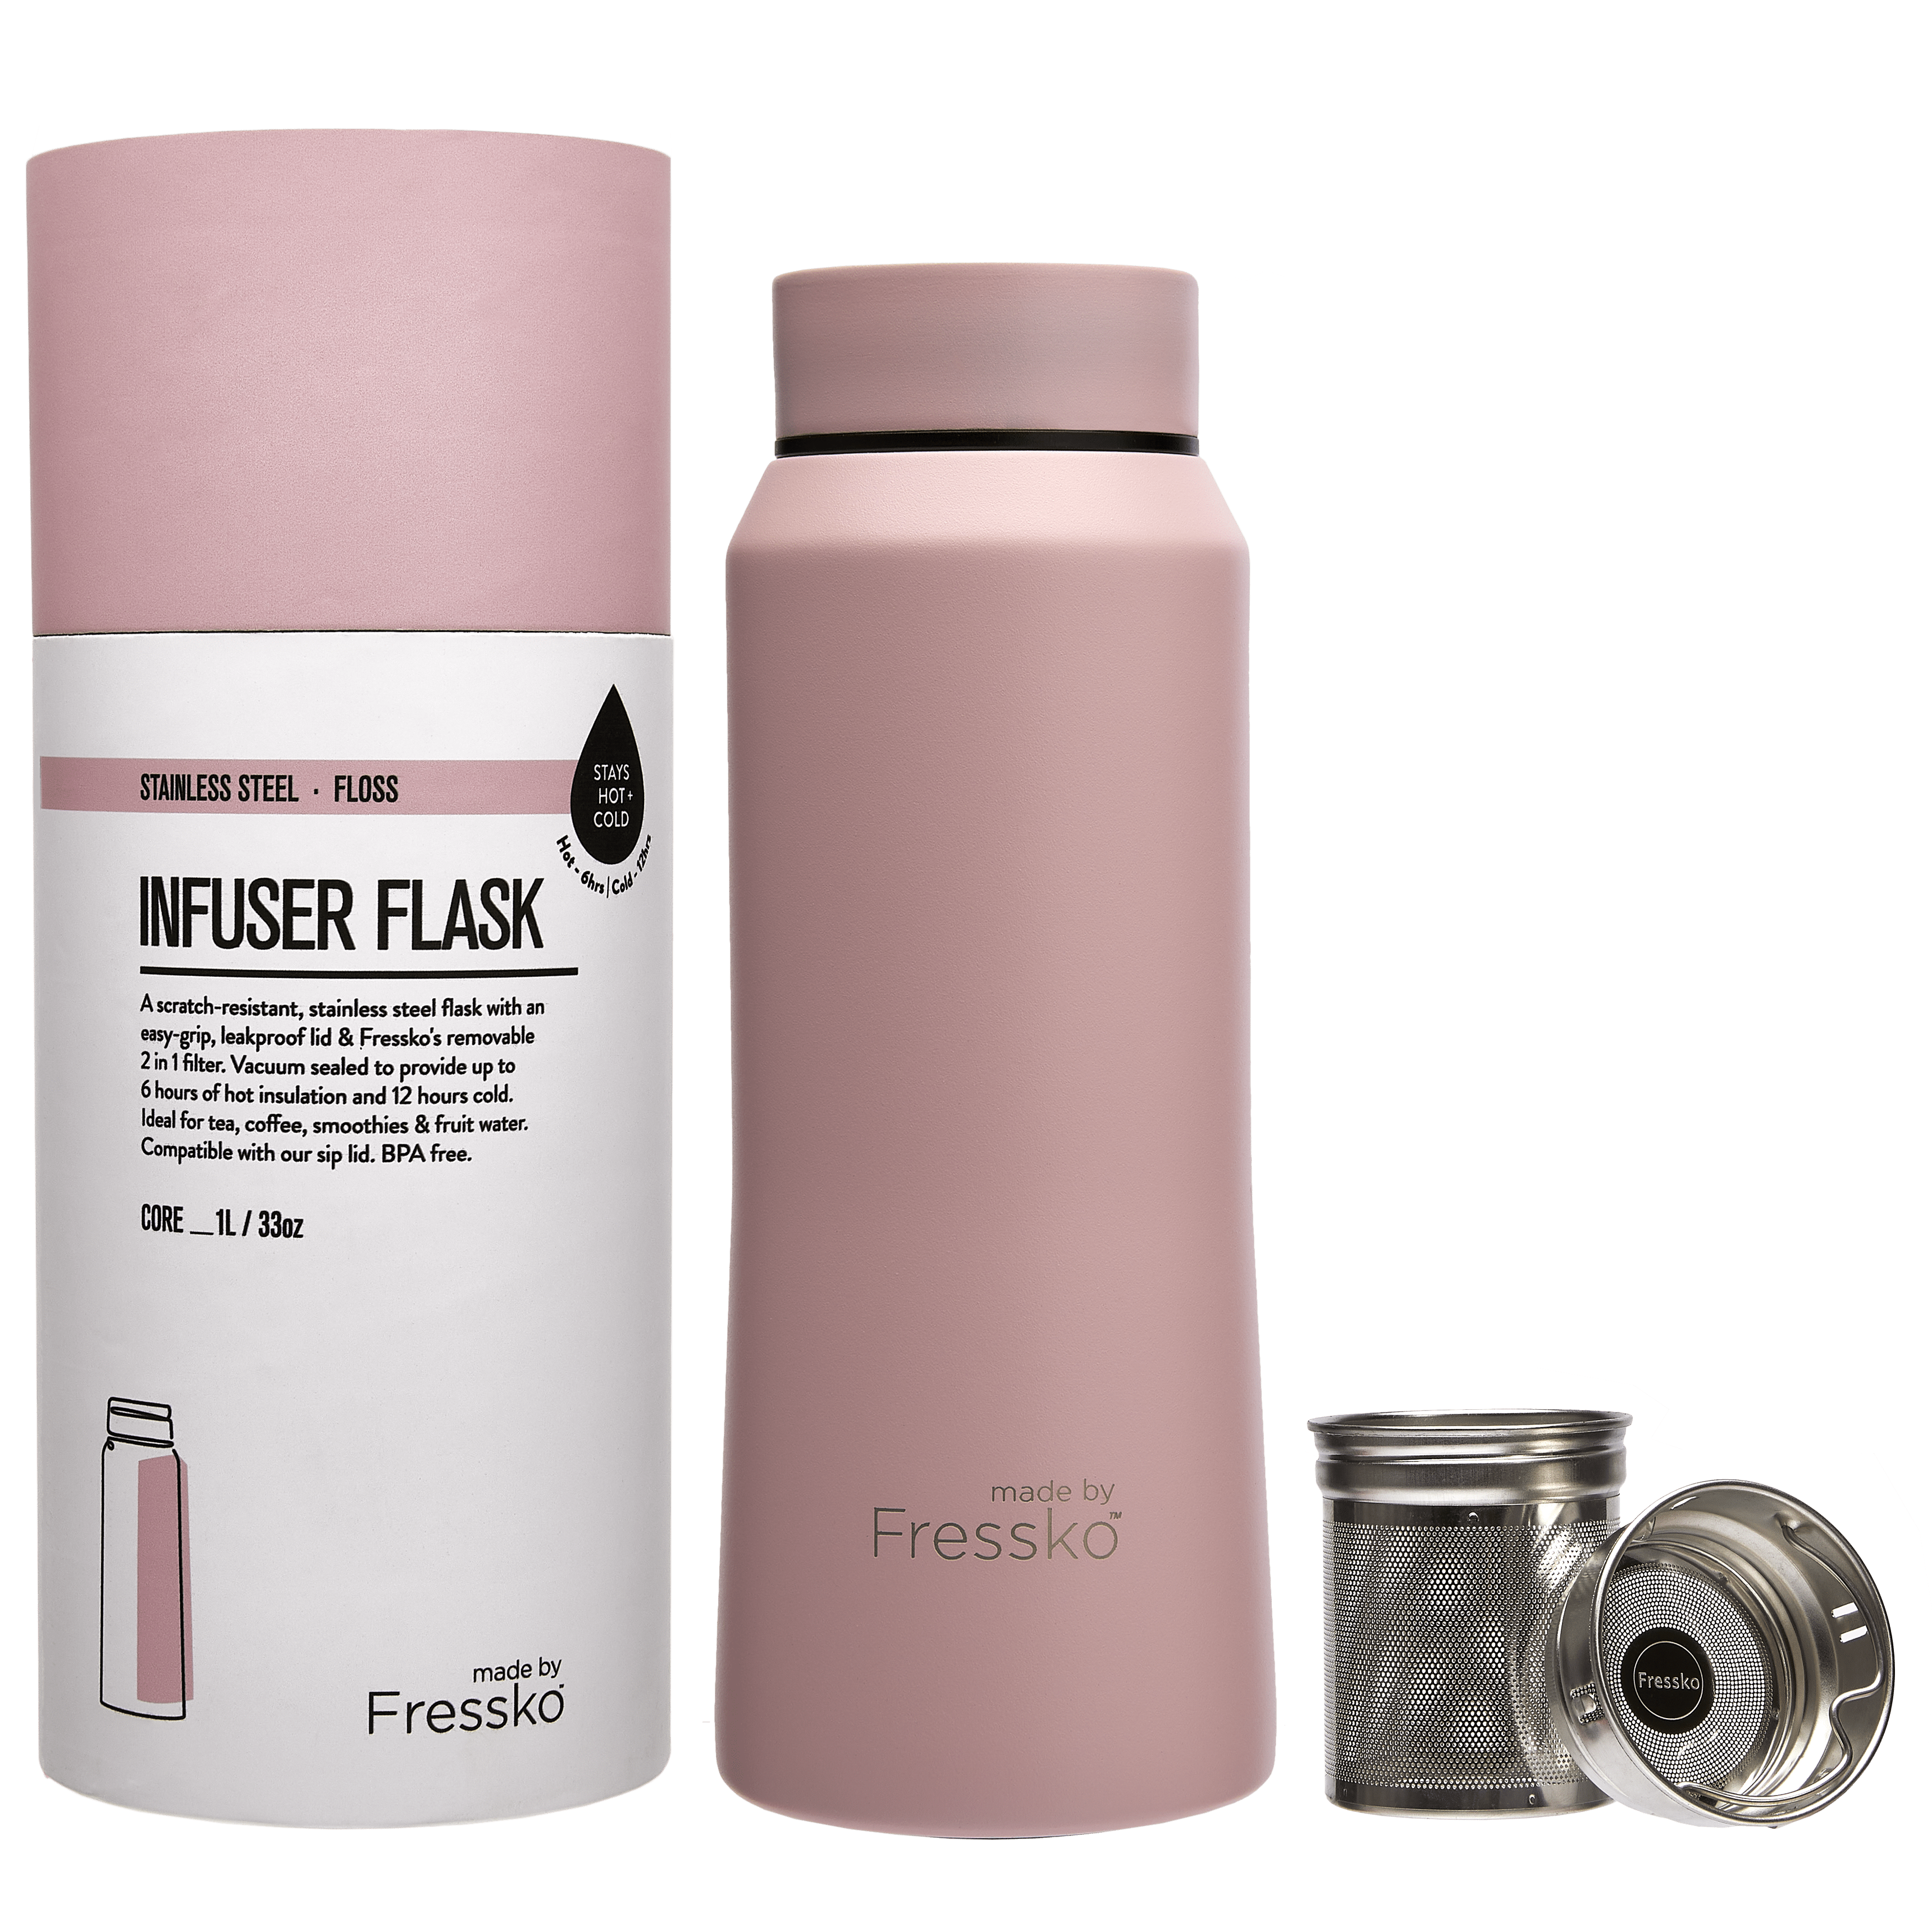 Infuser Flask | CORE 1 Litre - Floss Made By Fressko Stainless Steel Infuser Flask